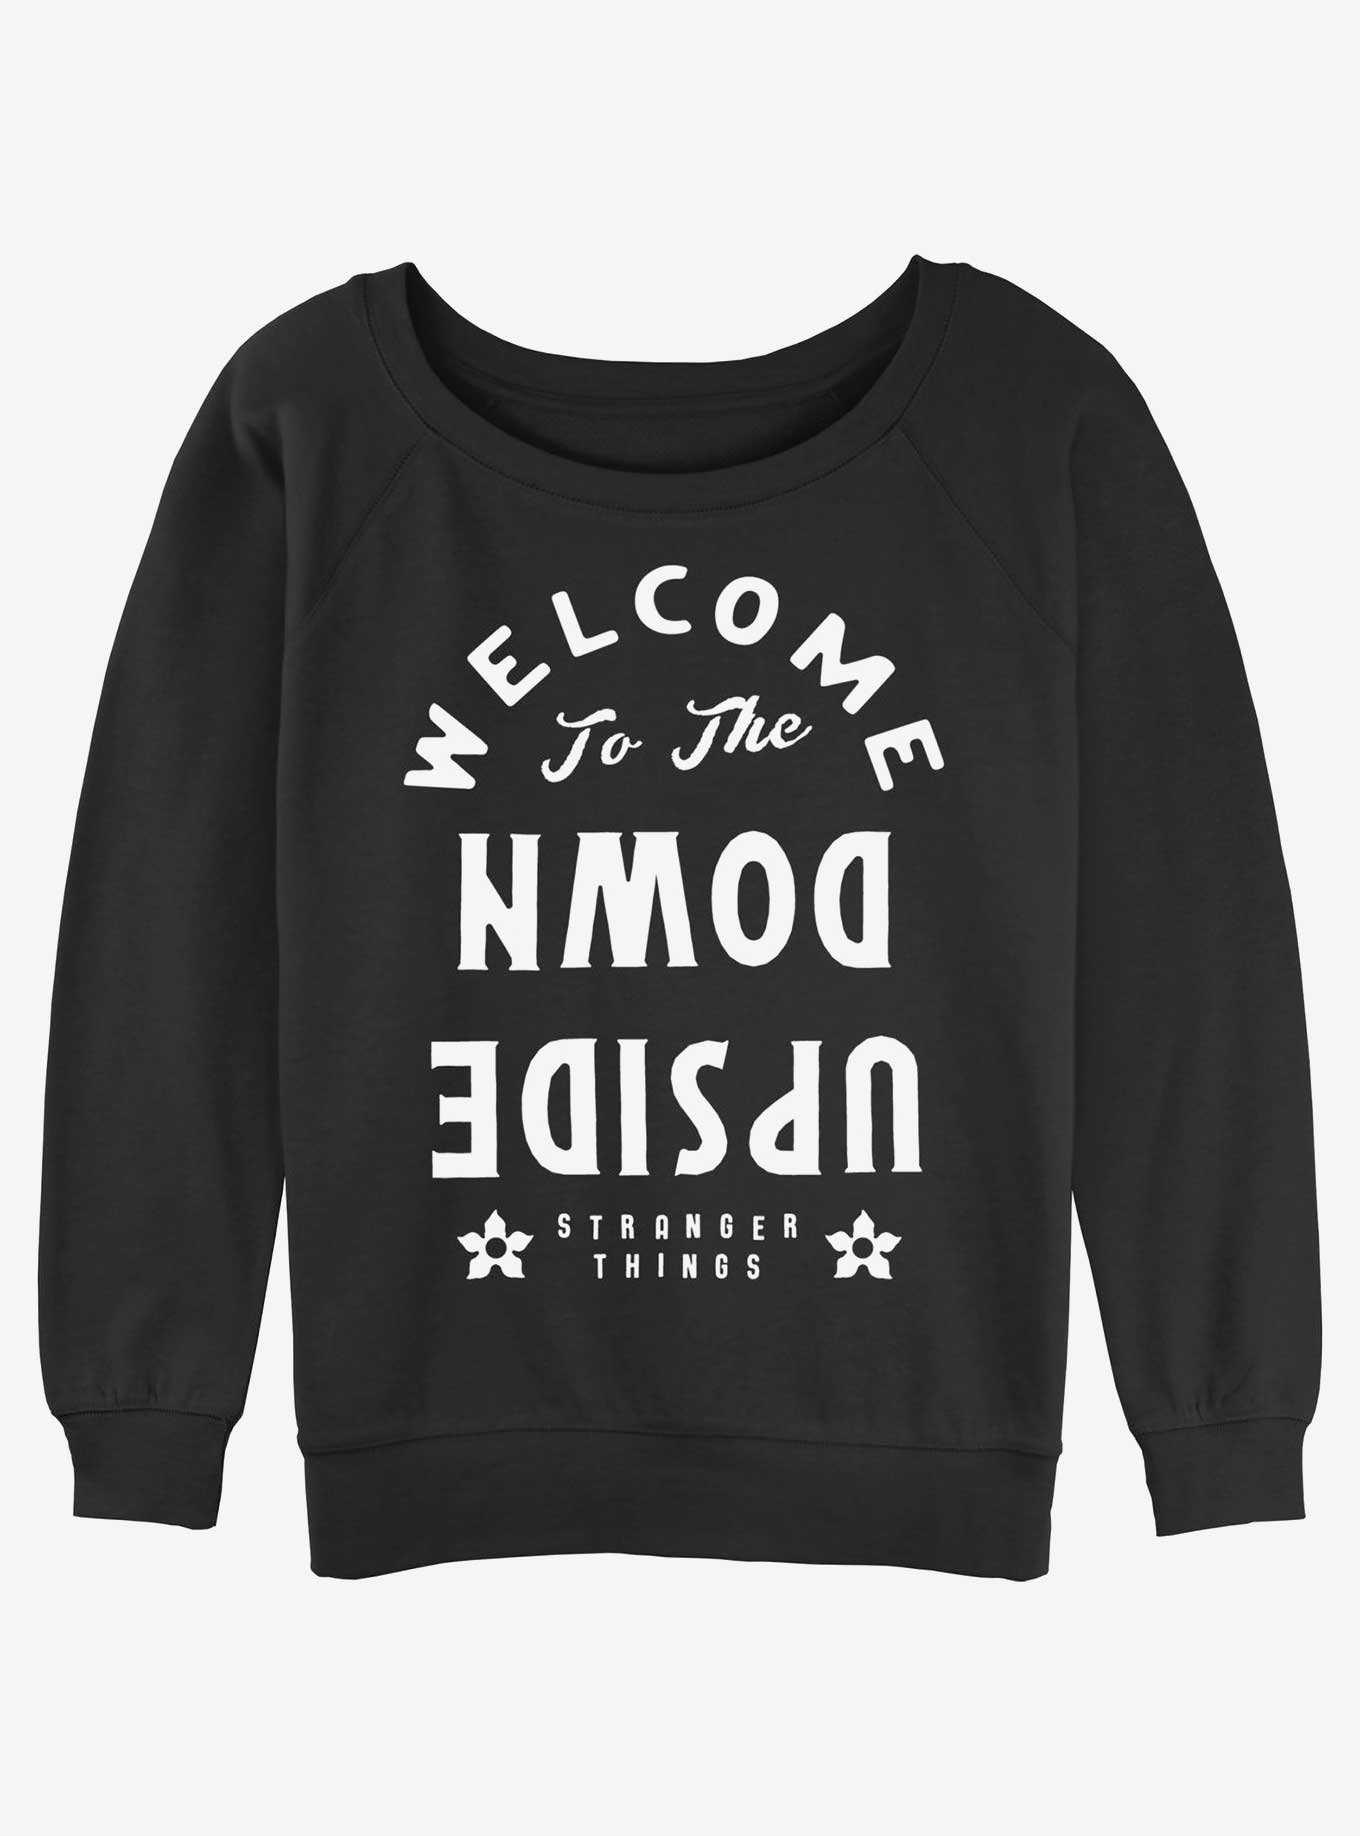 Stranger Things Welcome To The Upside Down Girls Slouchy Sweatshirt, , hi-res